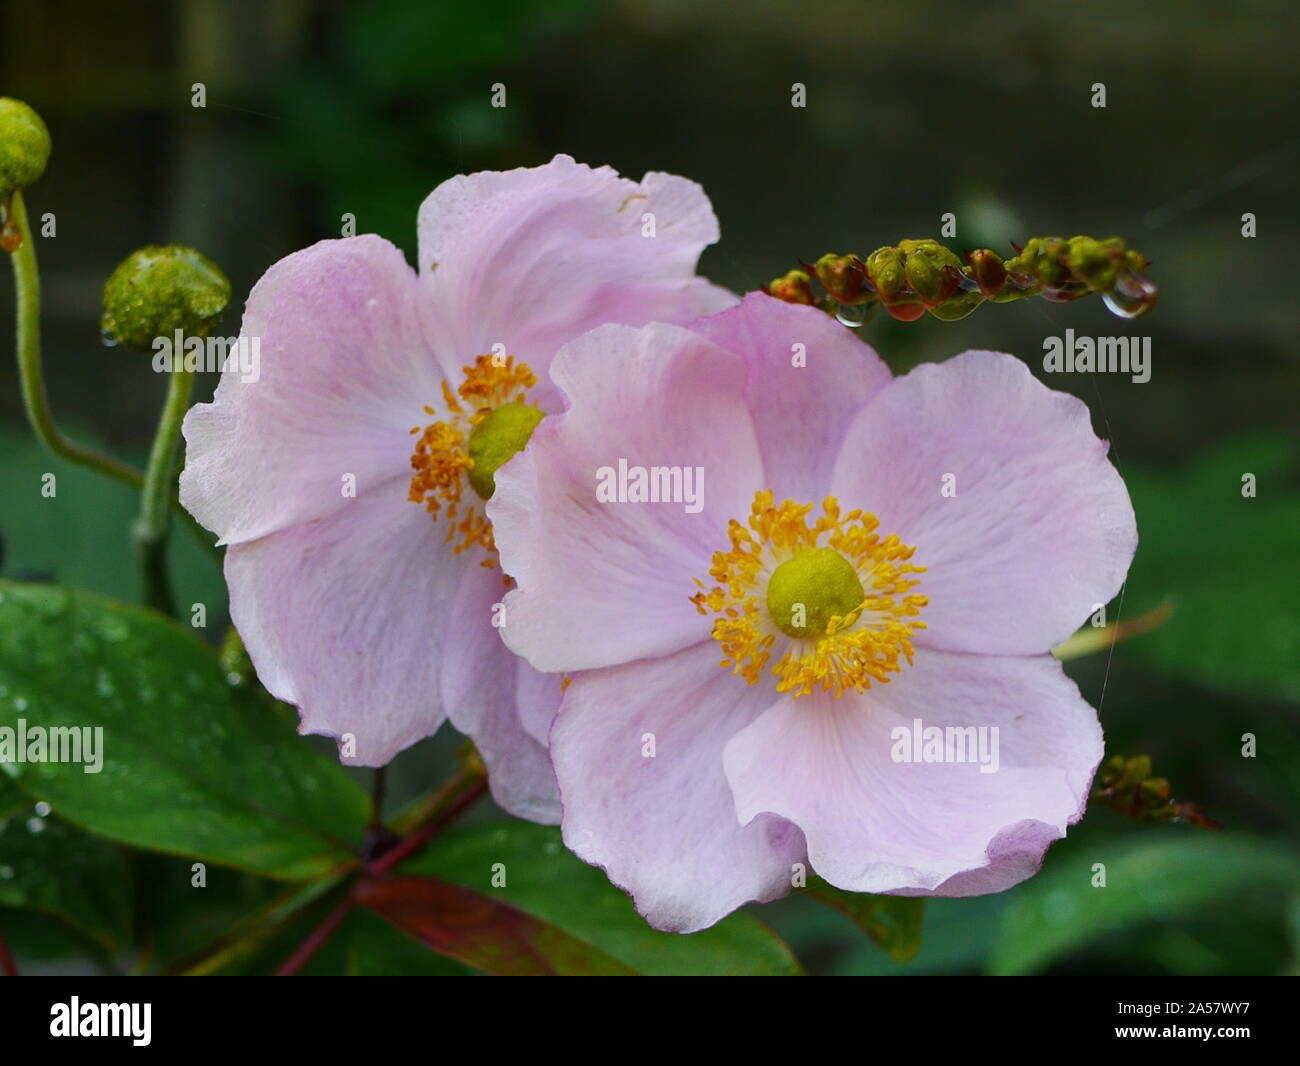 Closeup of two pink japanese anemone flowers Stock Photo